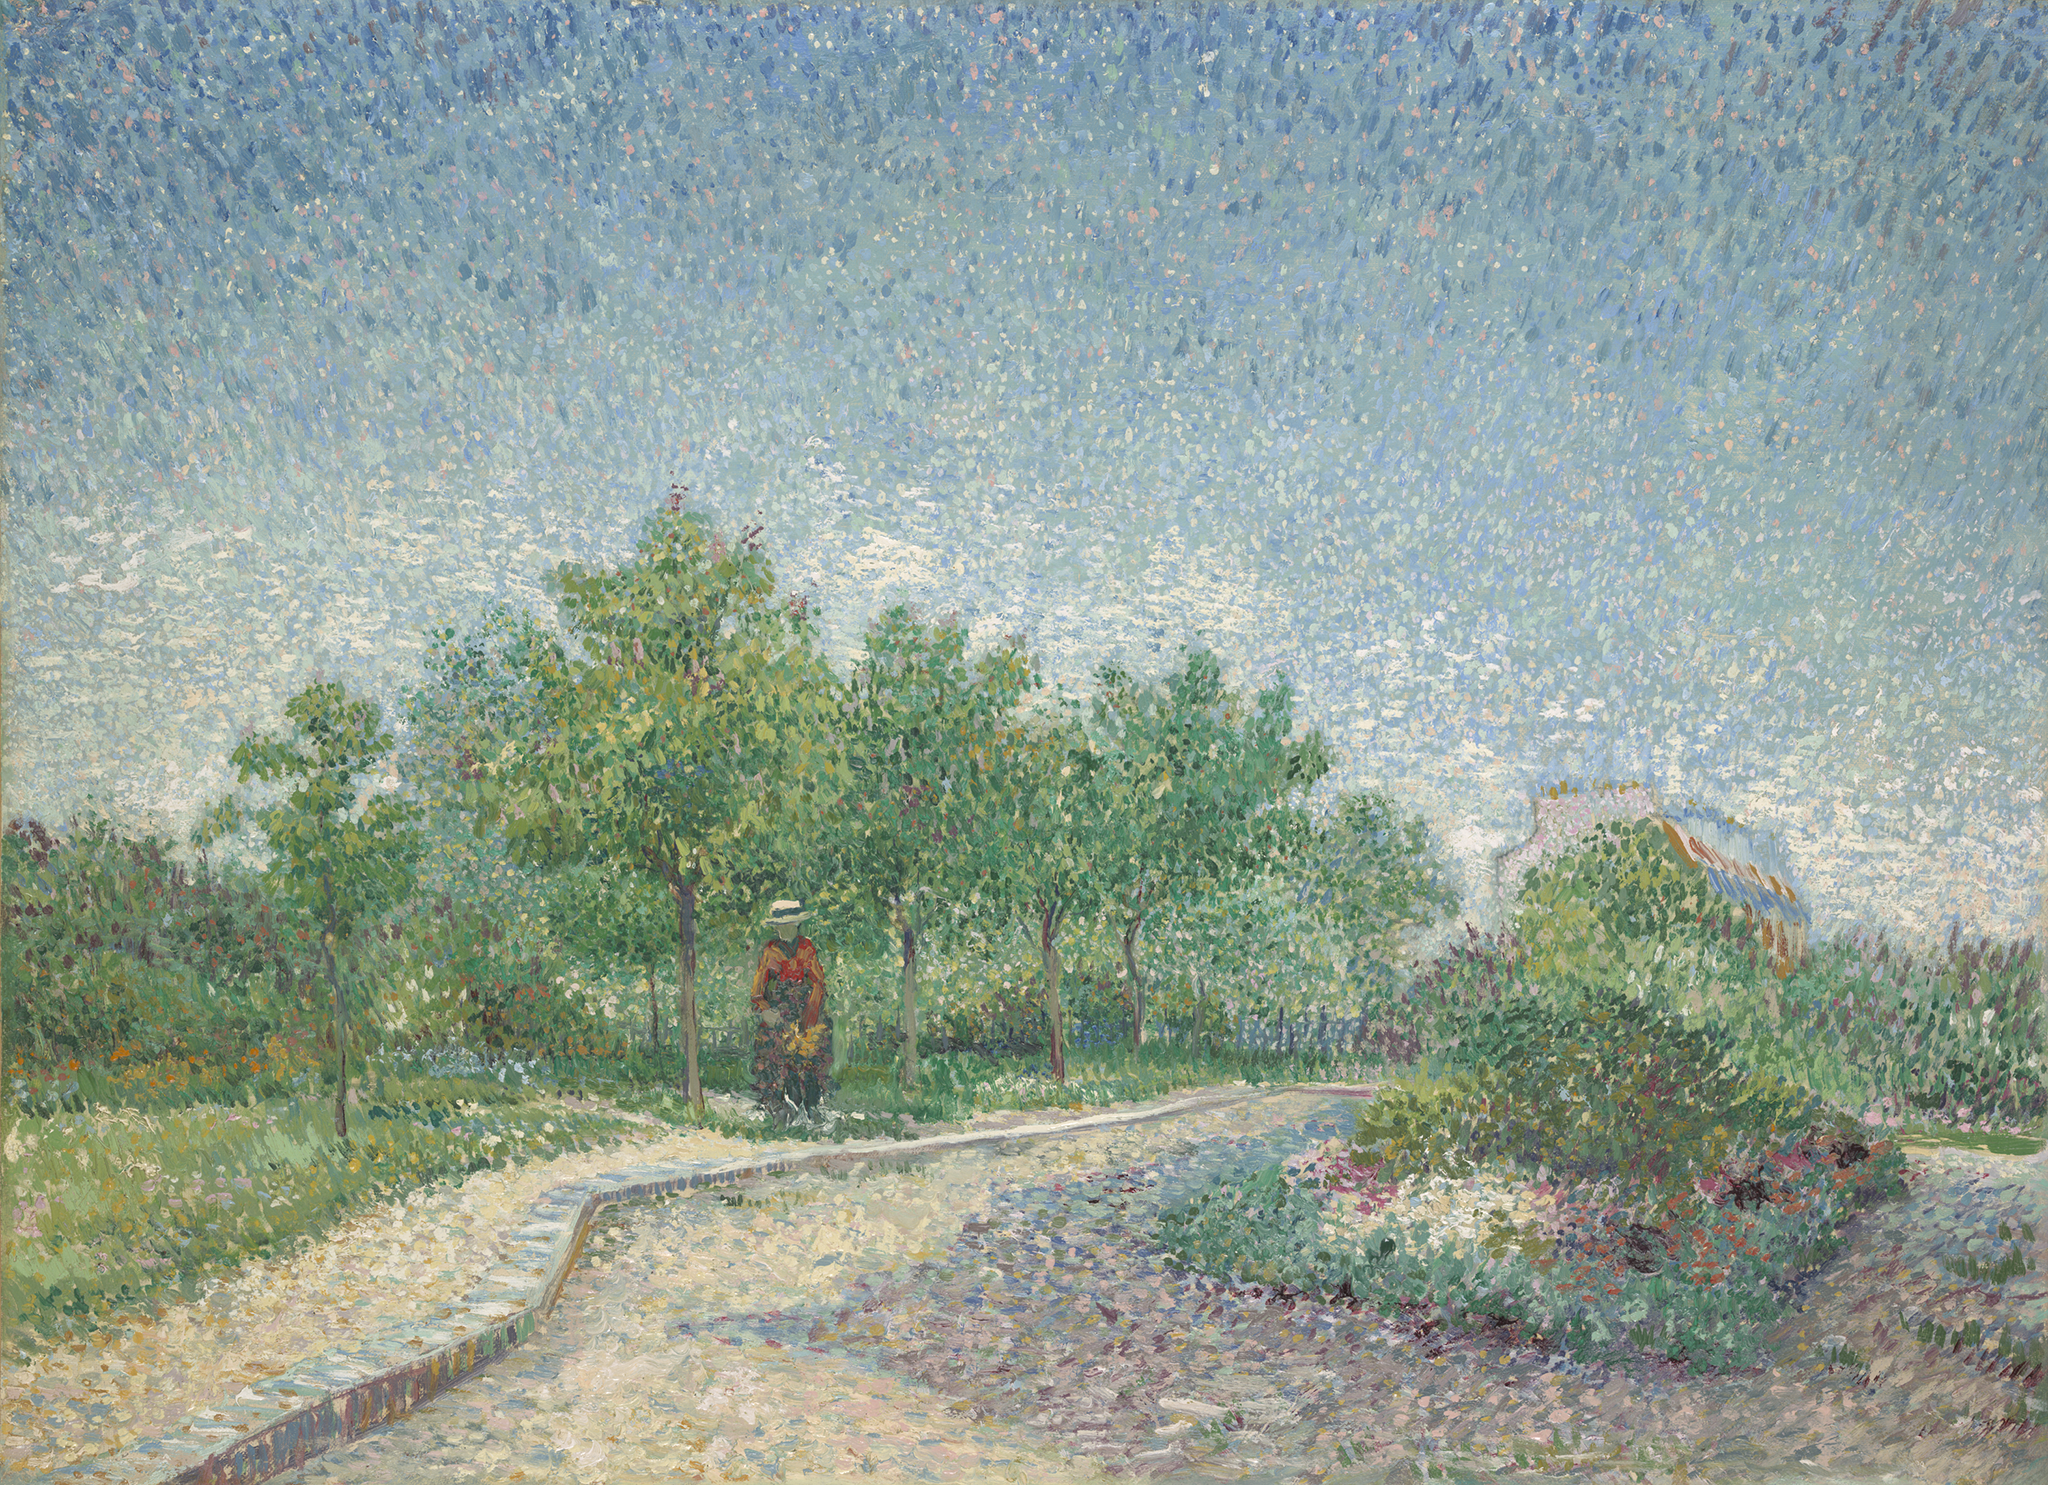 A painting depicting a figure wearing a red shirt and a white hat stands along a brick road under two green trees. To the right of him is a brick road which revolves around a small bush with flowers. In the background there is a top of a building along with more green leaves from trees.